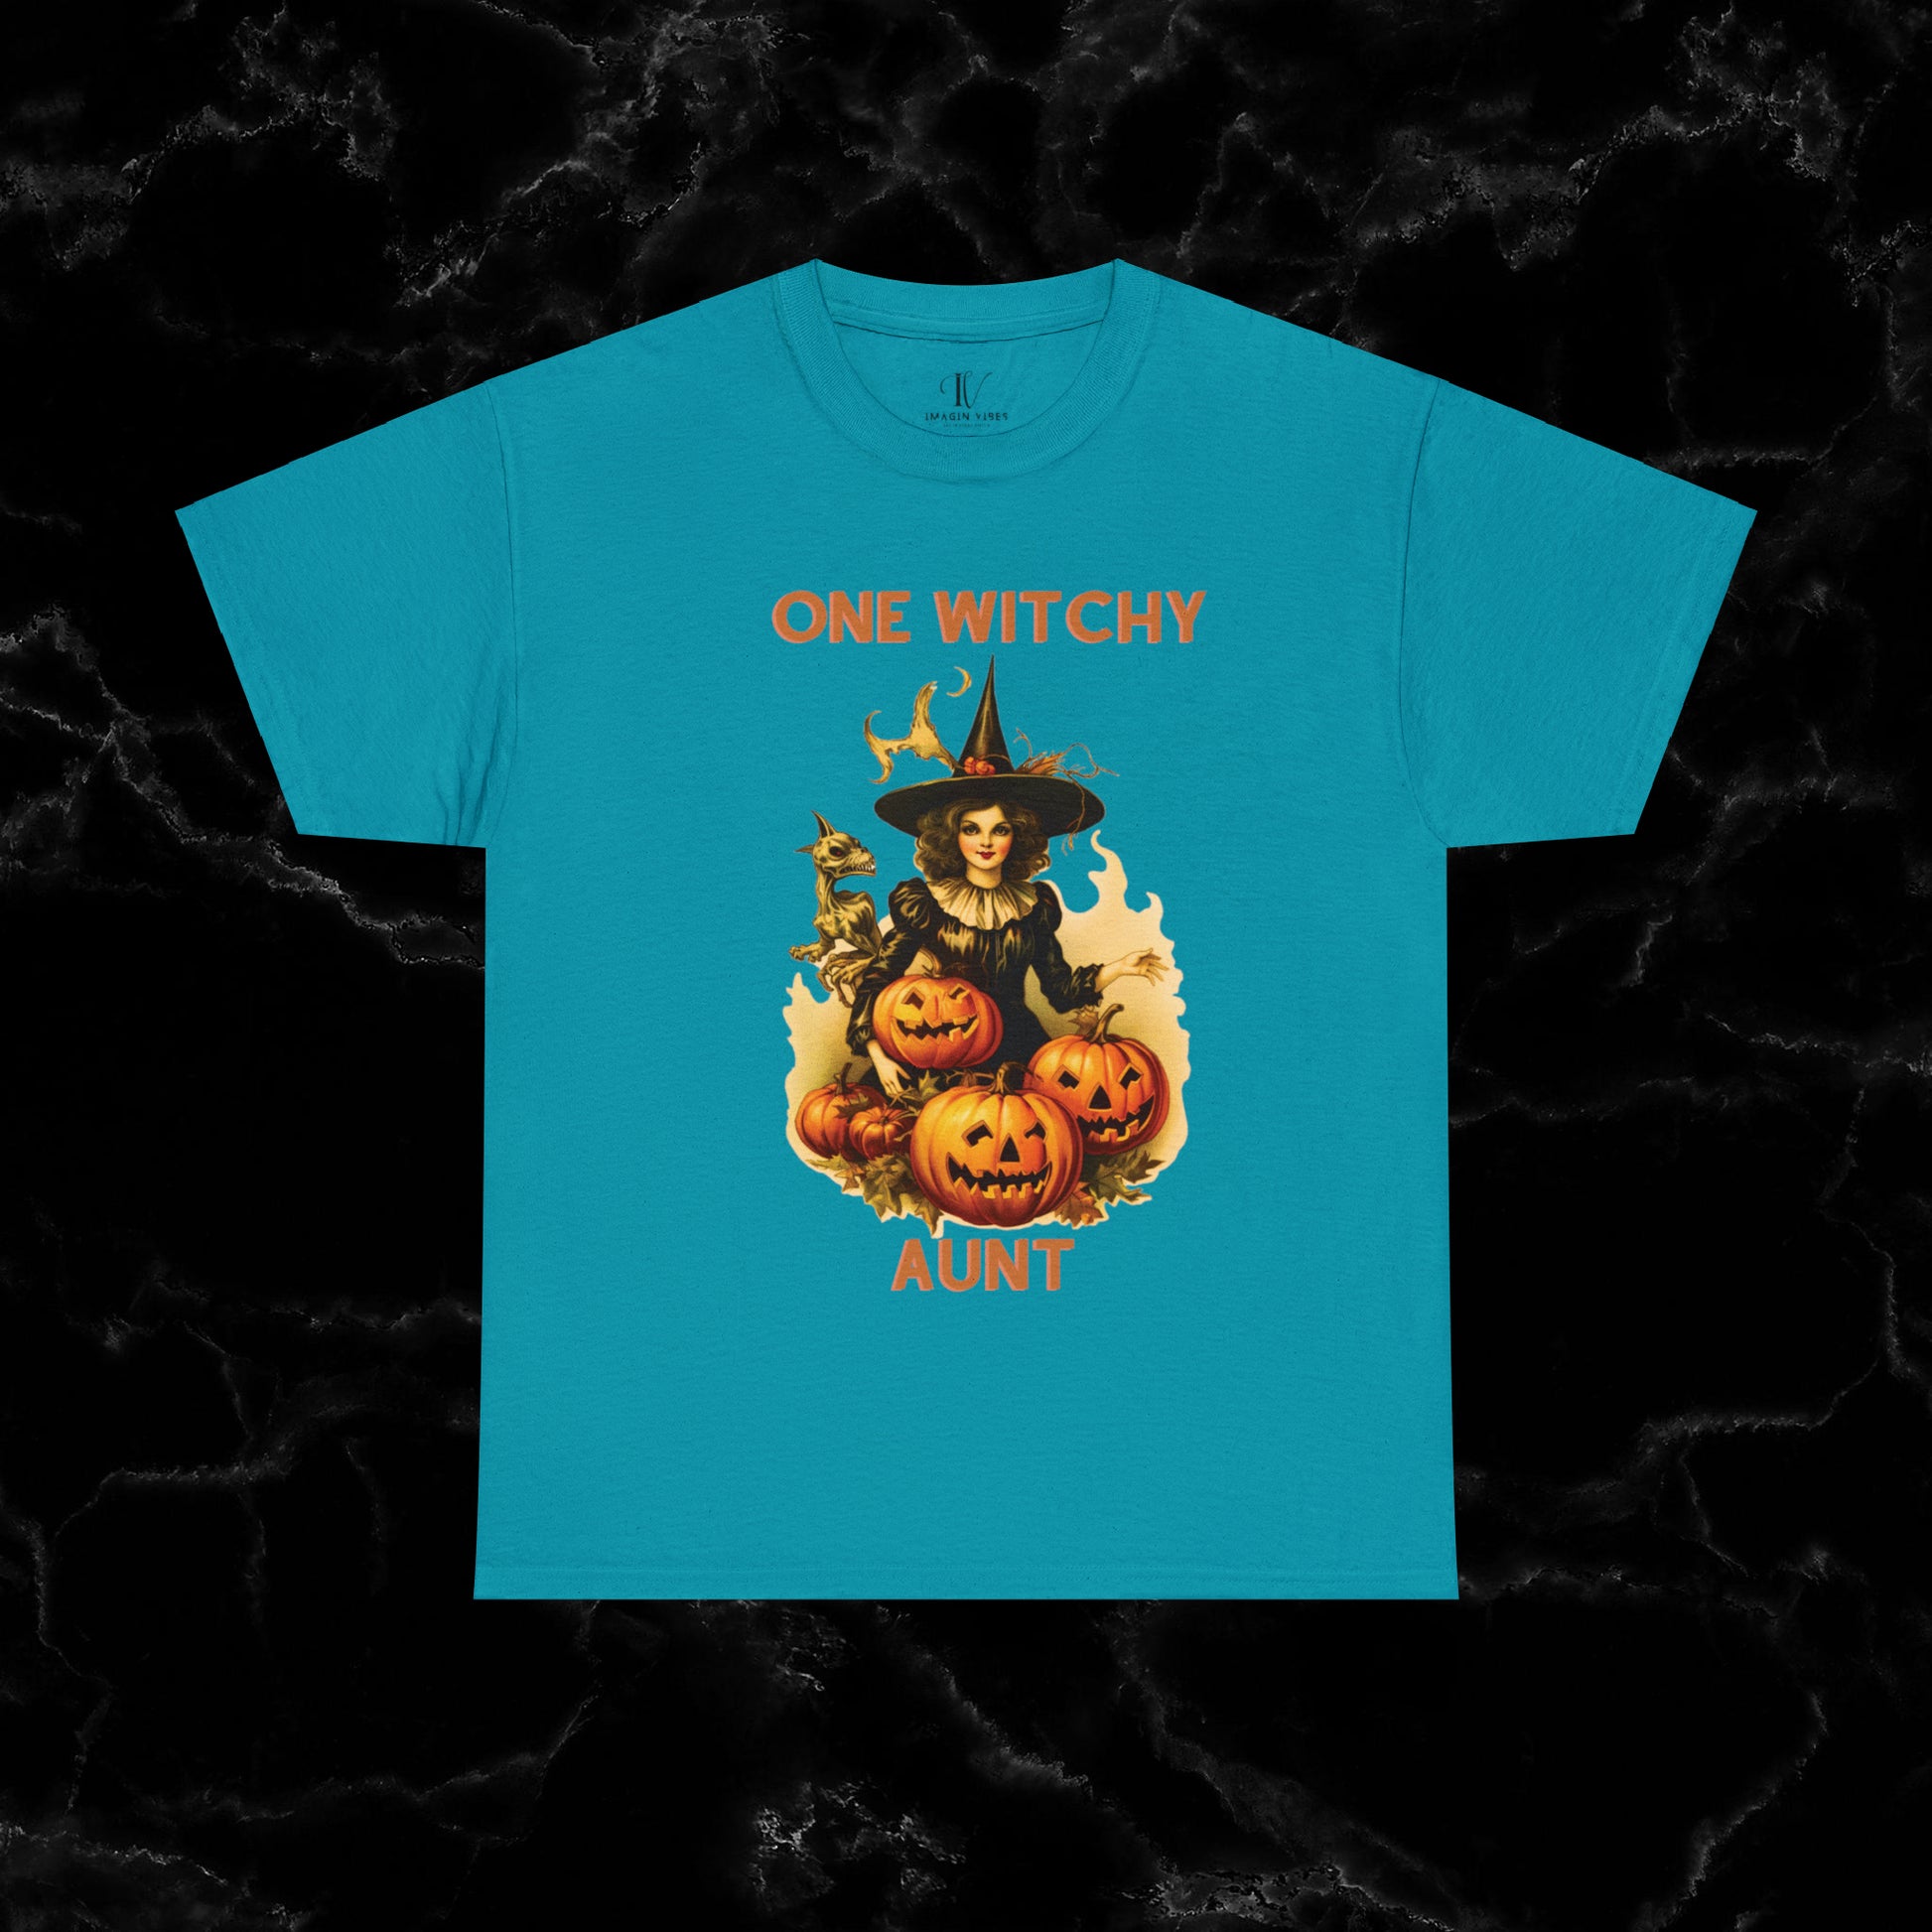 One Witchy Auntie Cotton T-Shirt - Cool Aunt, Aunt Halloween, Perfect Gift for Aunts T-Shirt Tropical Blue S 